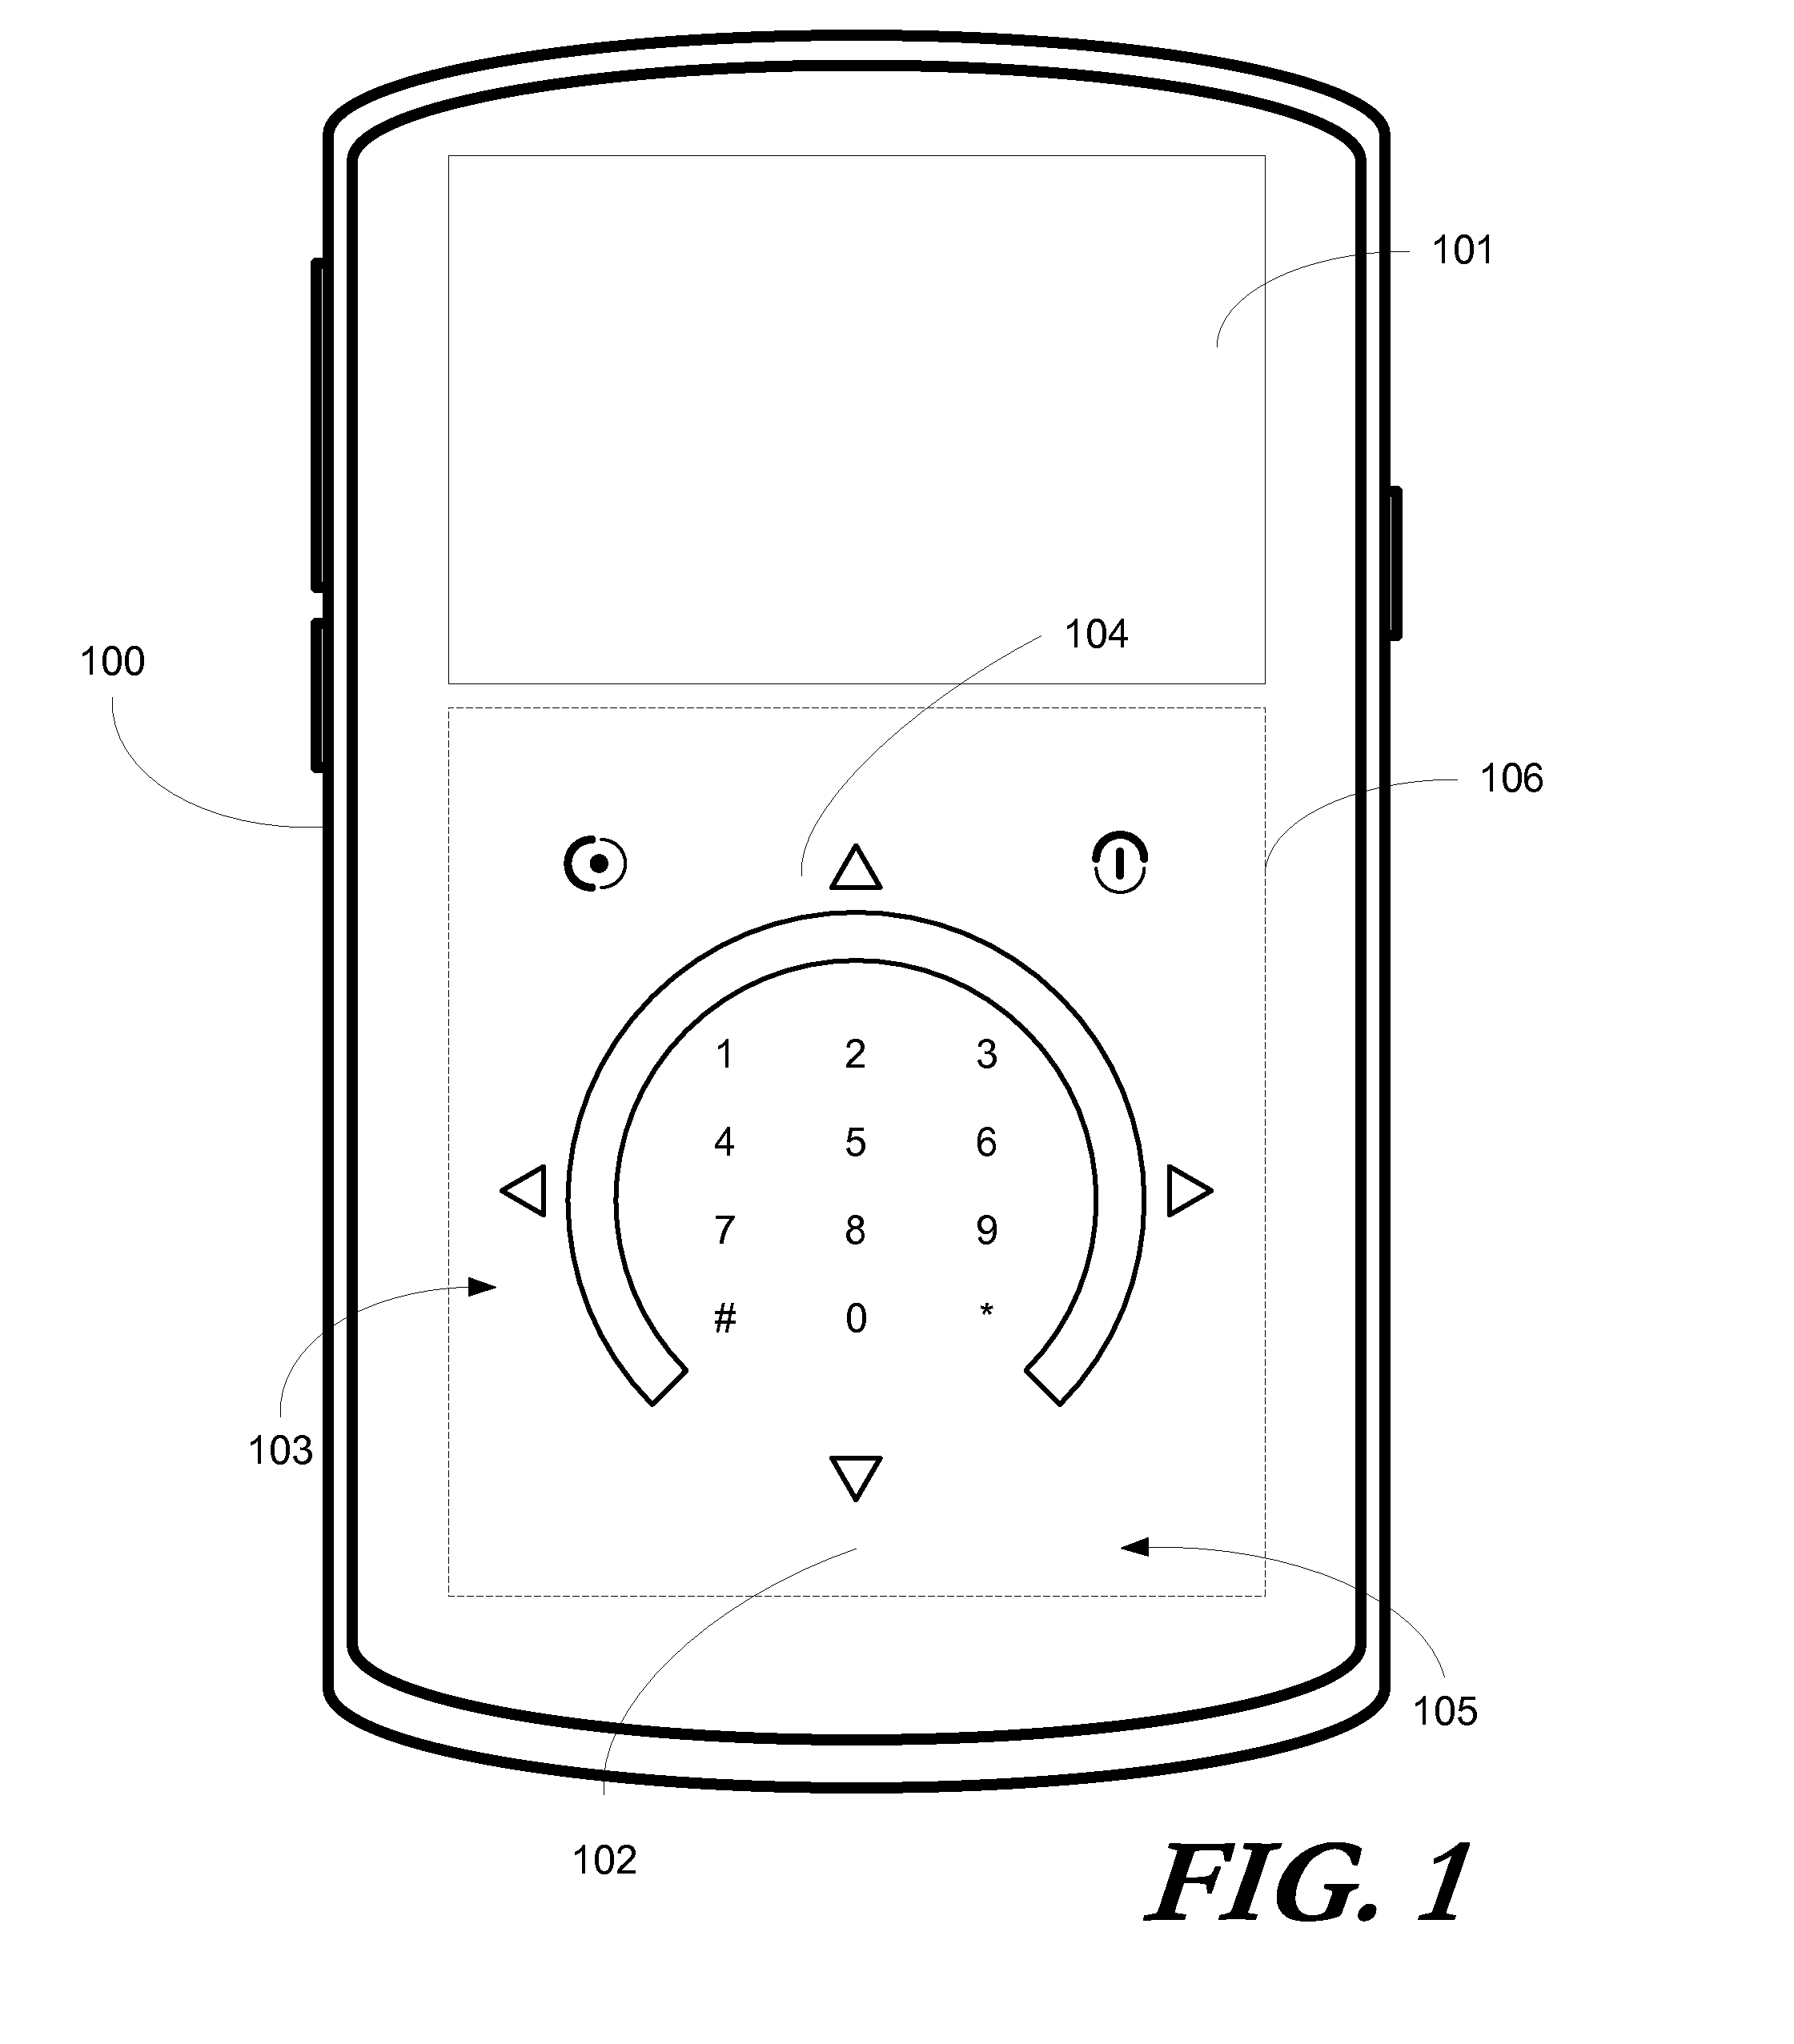 Multimodal Adaptive User Interface for a Portable Electronic Device